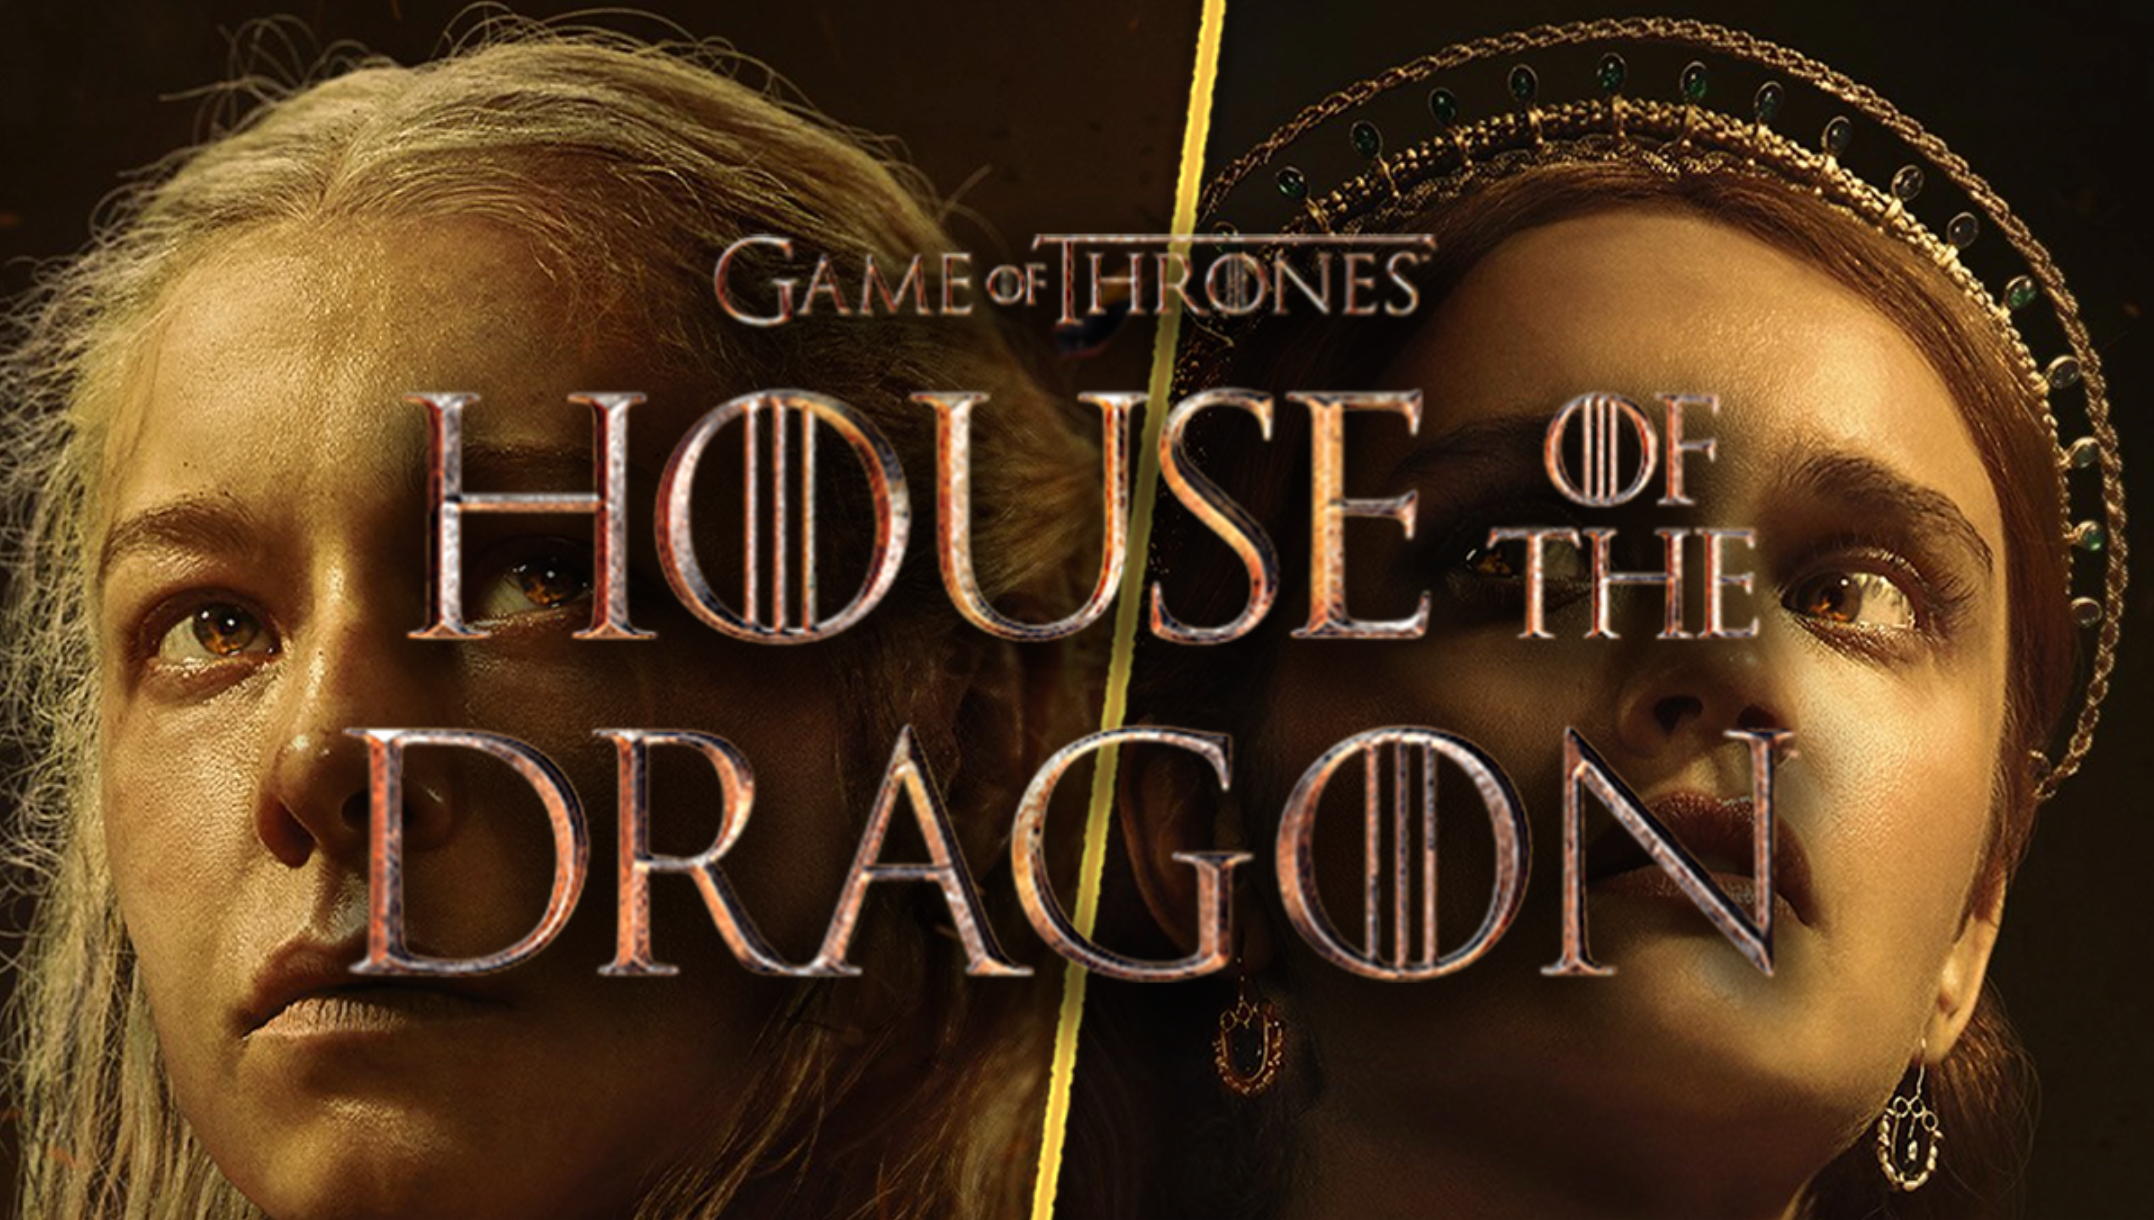 Game of Thrones: HBO renews 'House of the Dragon' for season 2